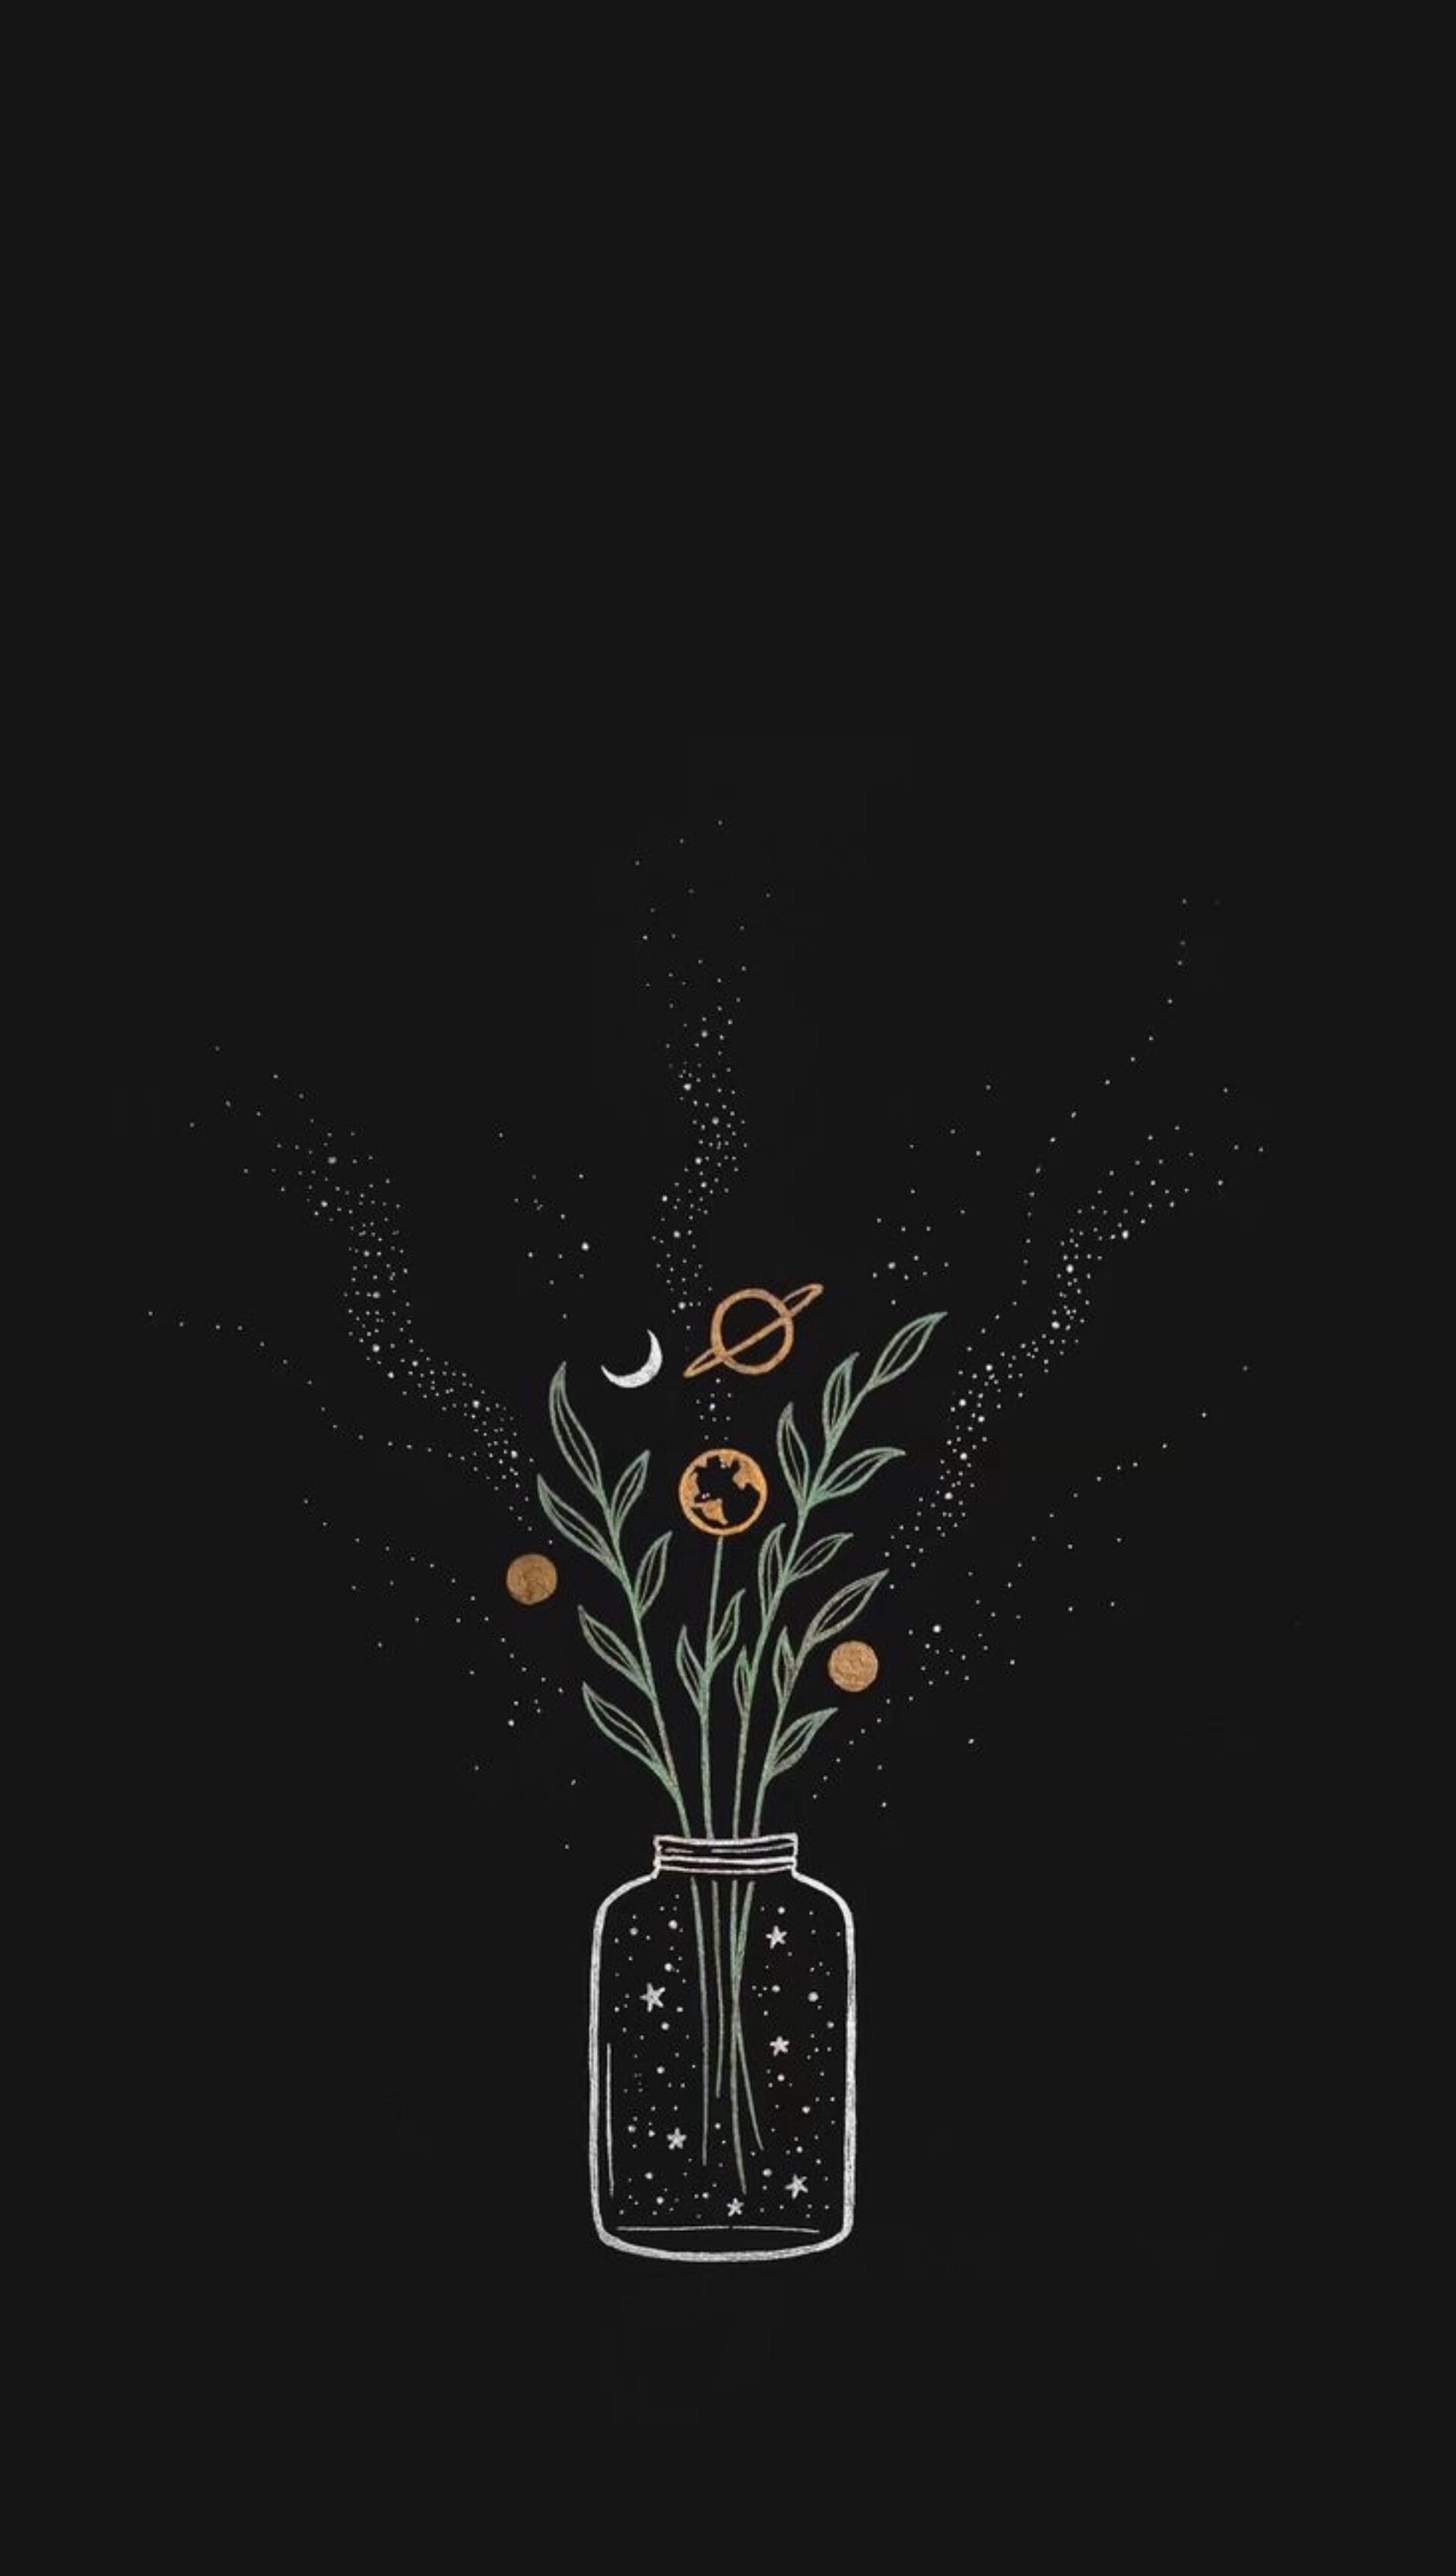 A vase with flowers and stars in the background - Pastel minimalist